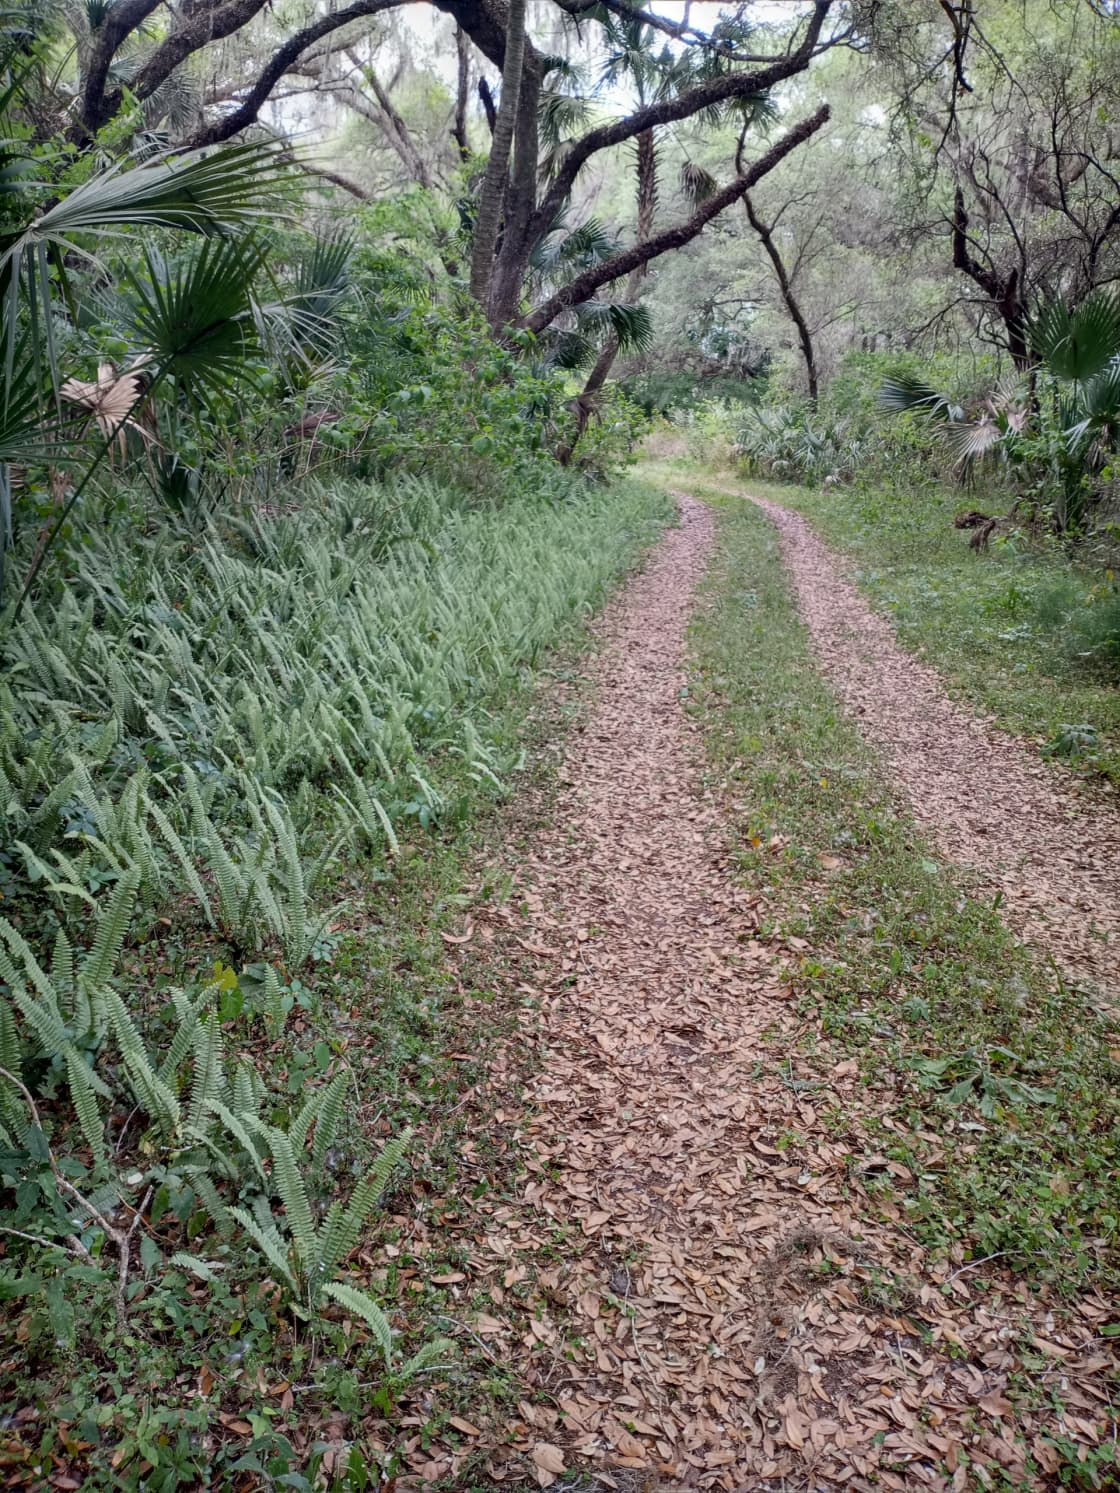 Part of the miles of trails next to the campsites